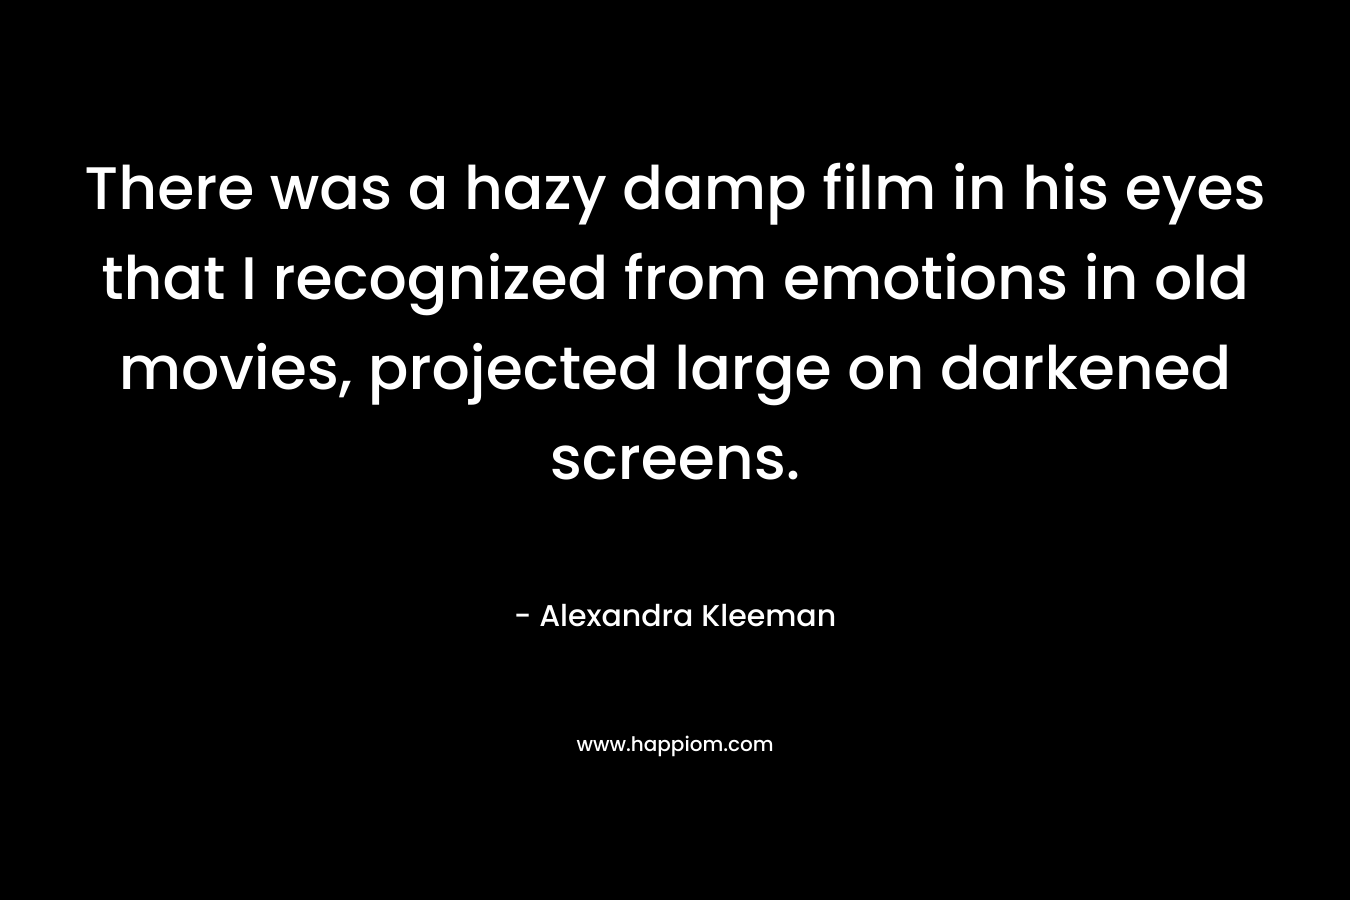 There was a hazy damp film in his eyes that I recognized from emotions in old movies, projected large on darkened screens.